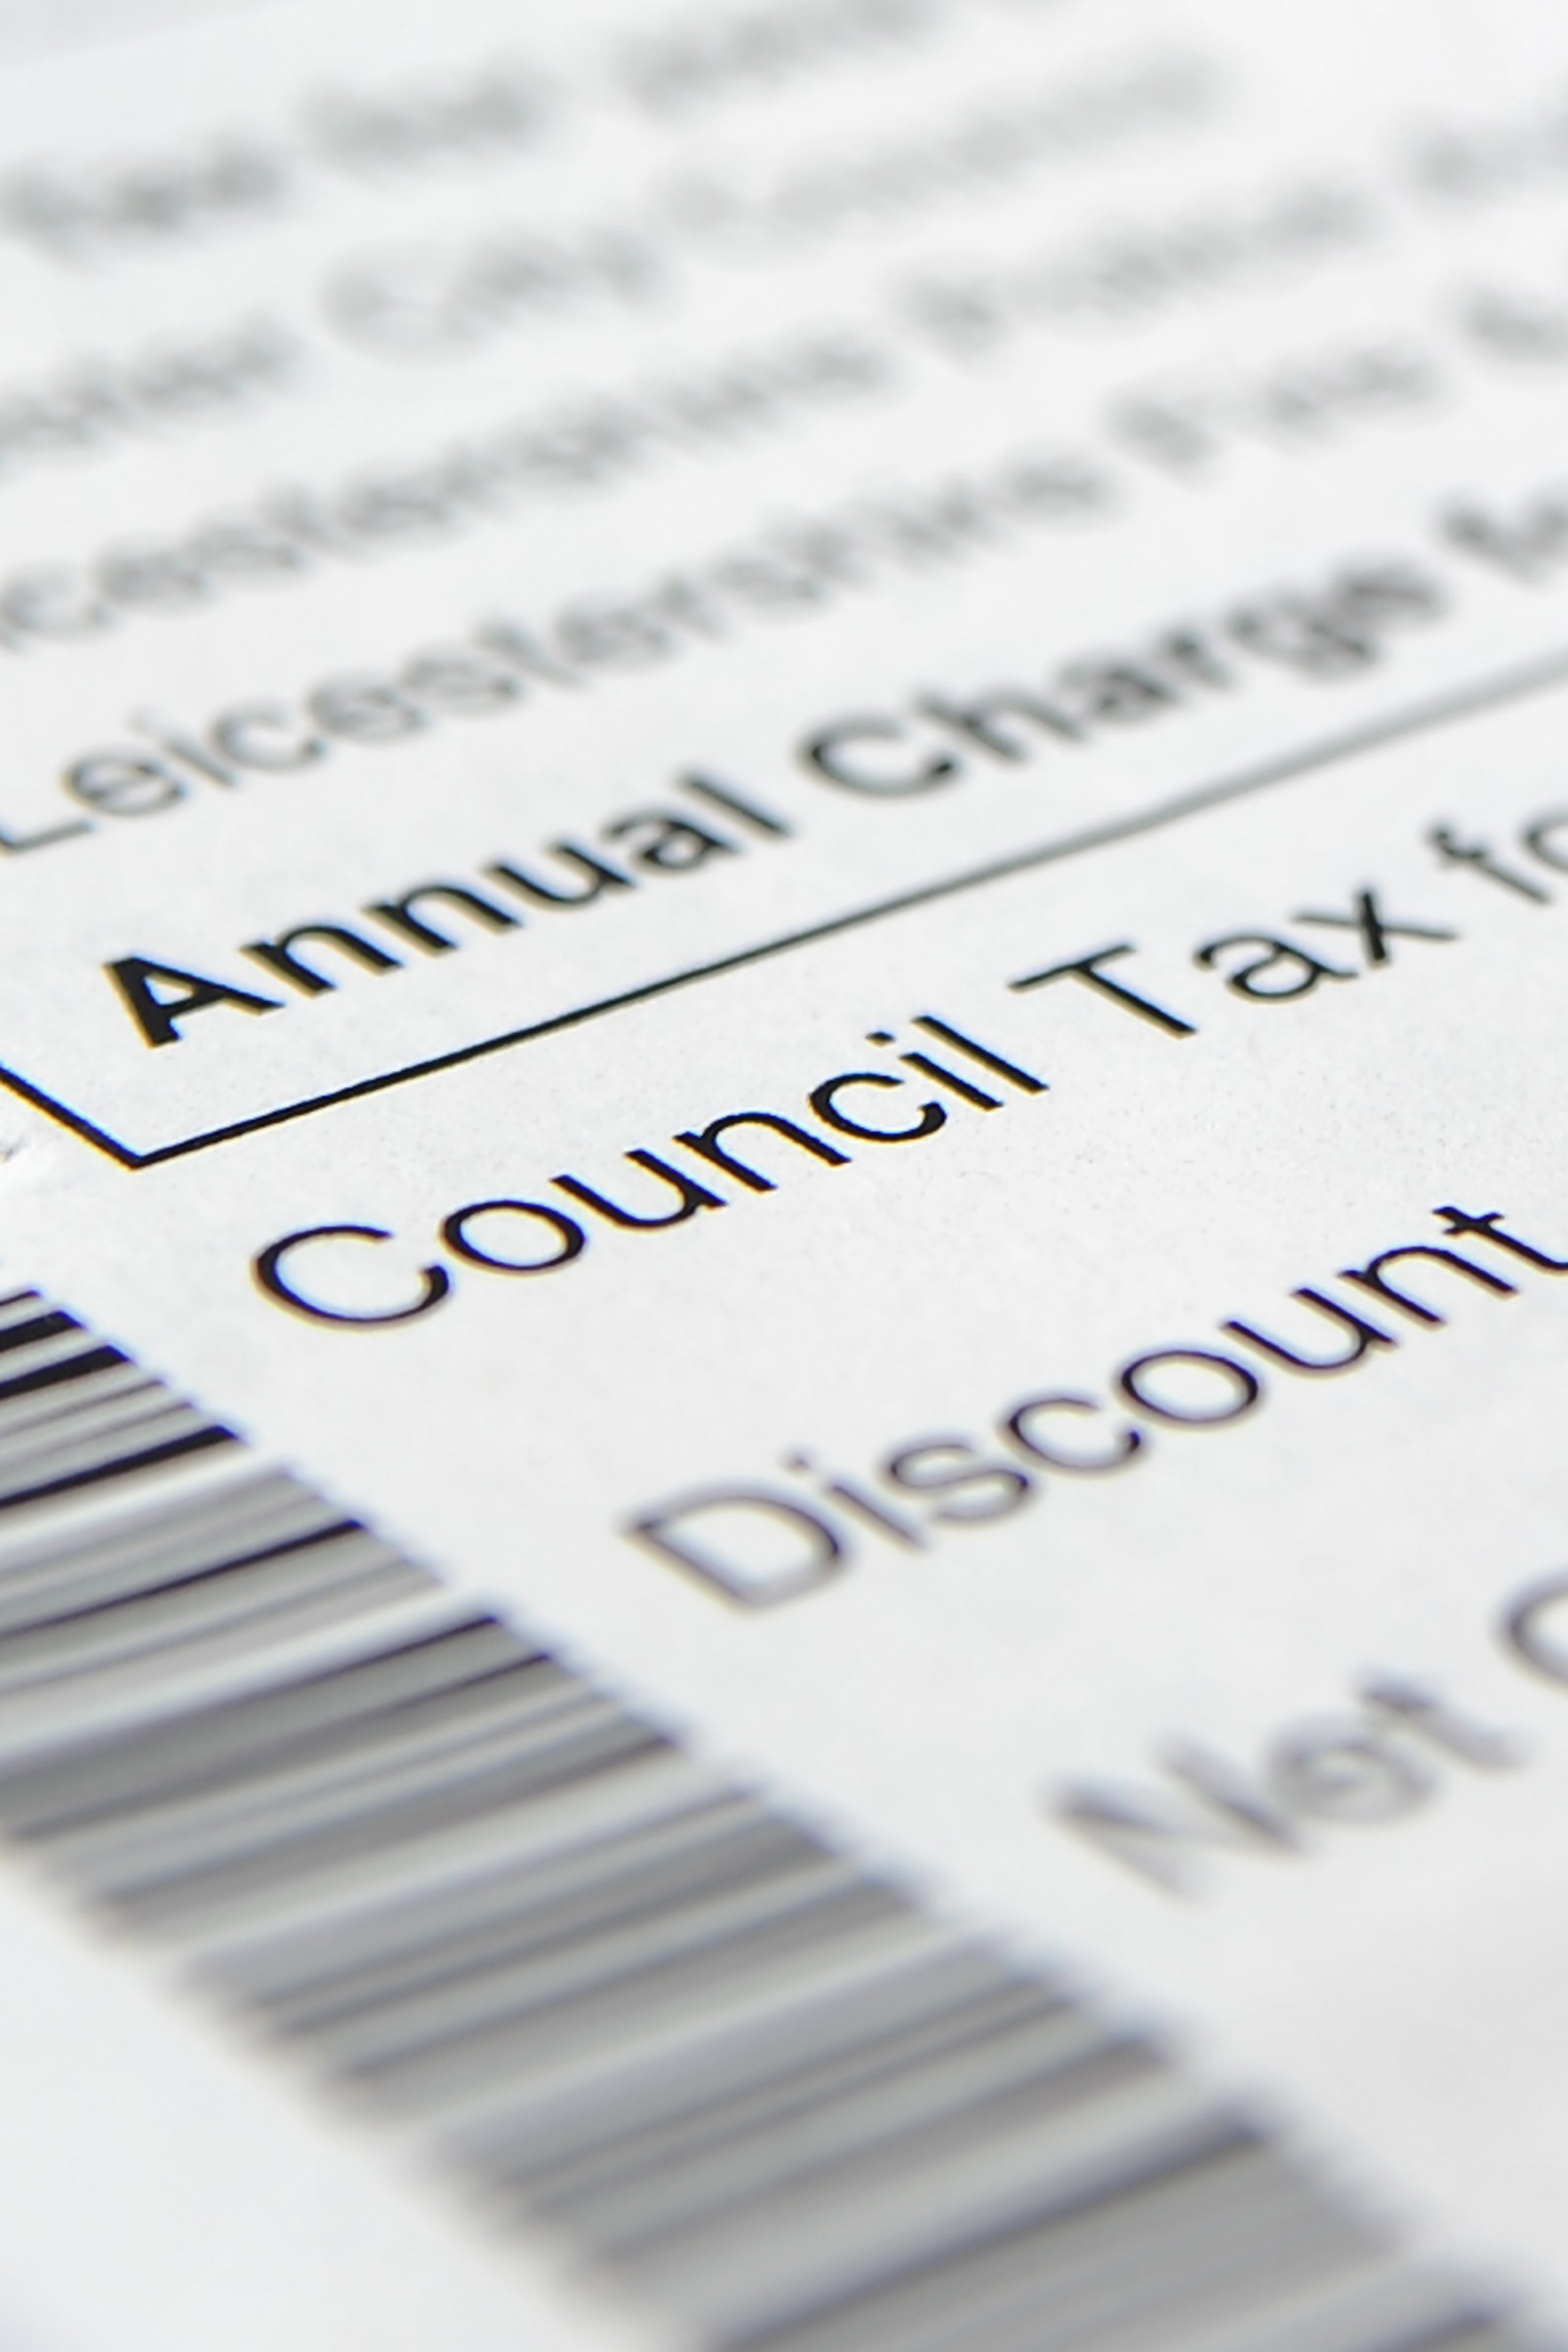 Households eligible for a £150 energy rebate payment may get their money more quickly by paying their council tax by direct debit, the Local Government Association has said (Joe Giddens/PA)